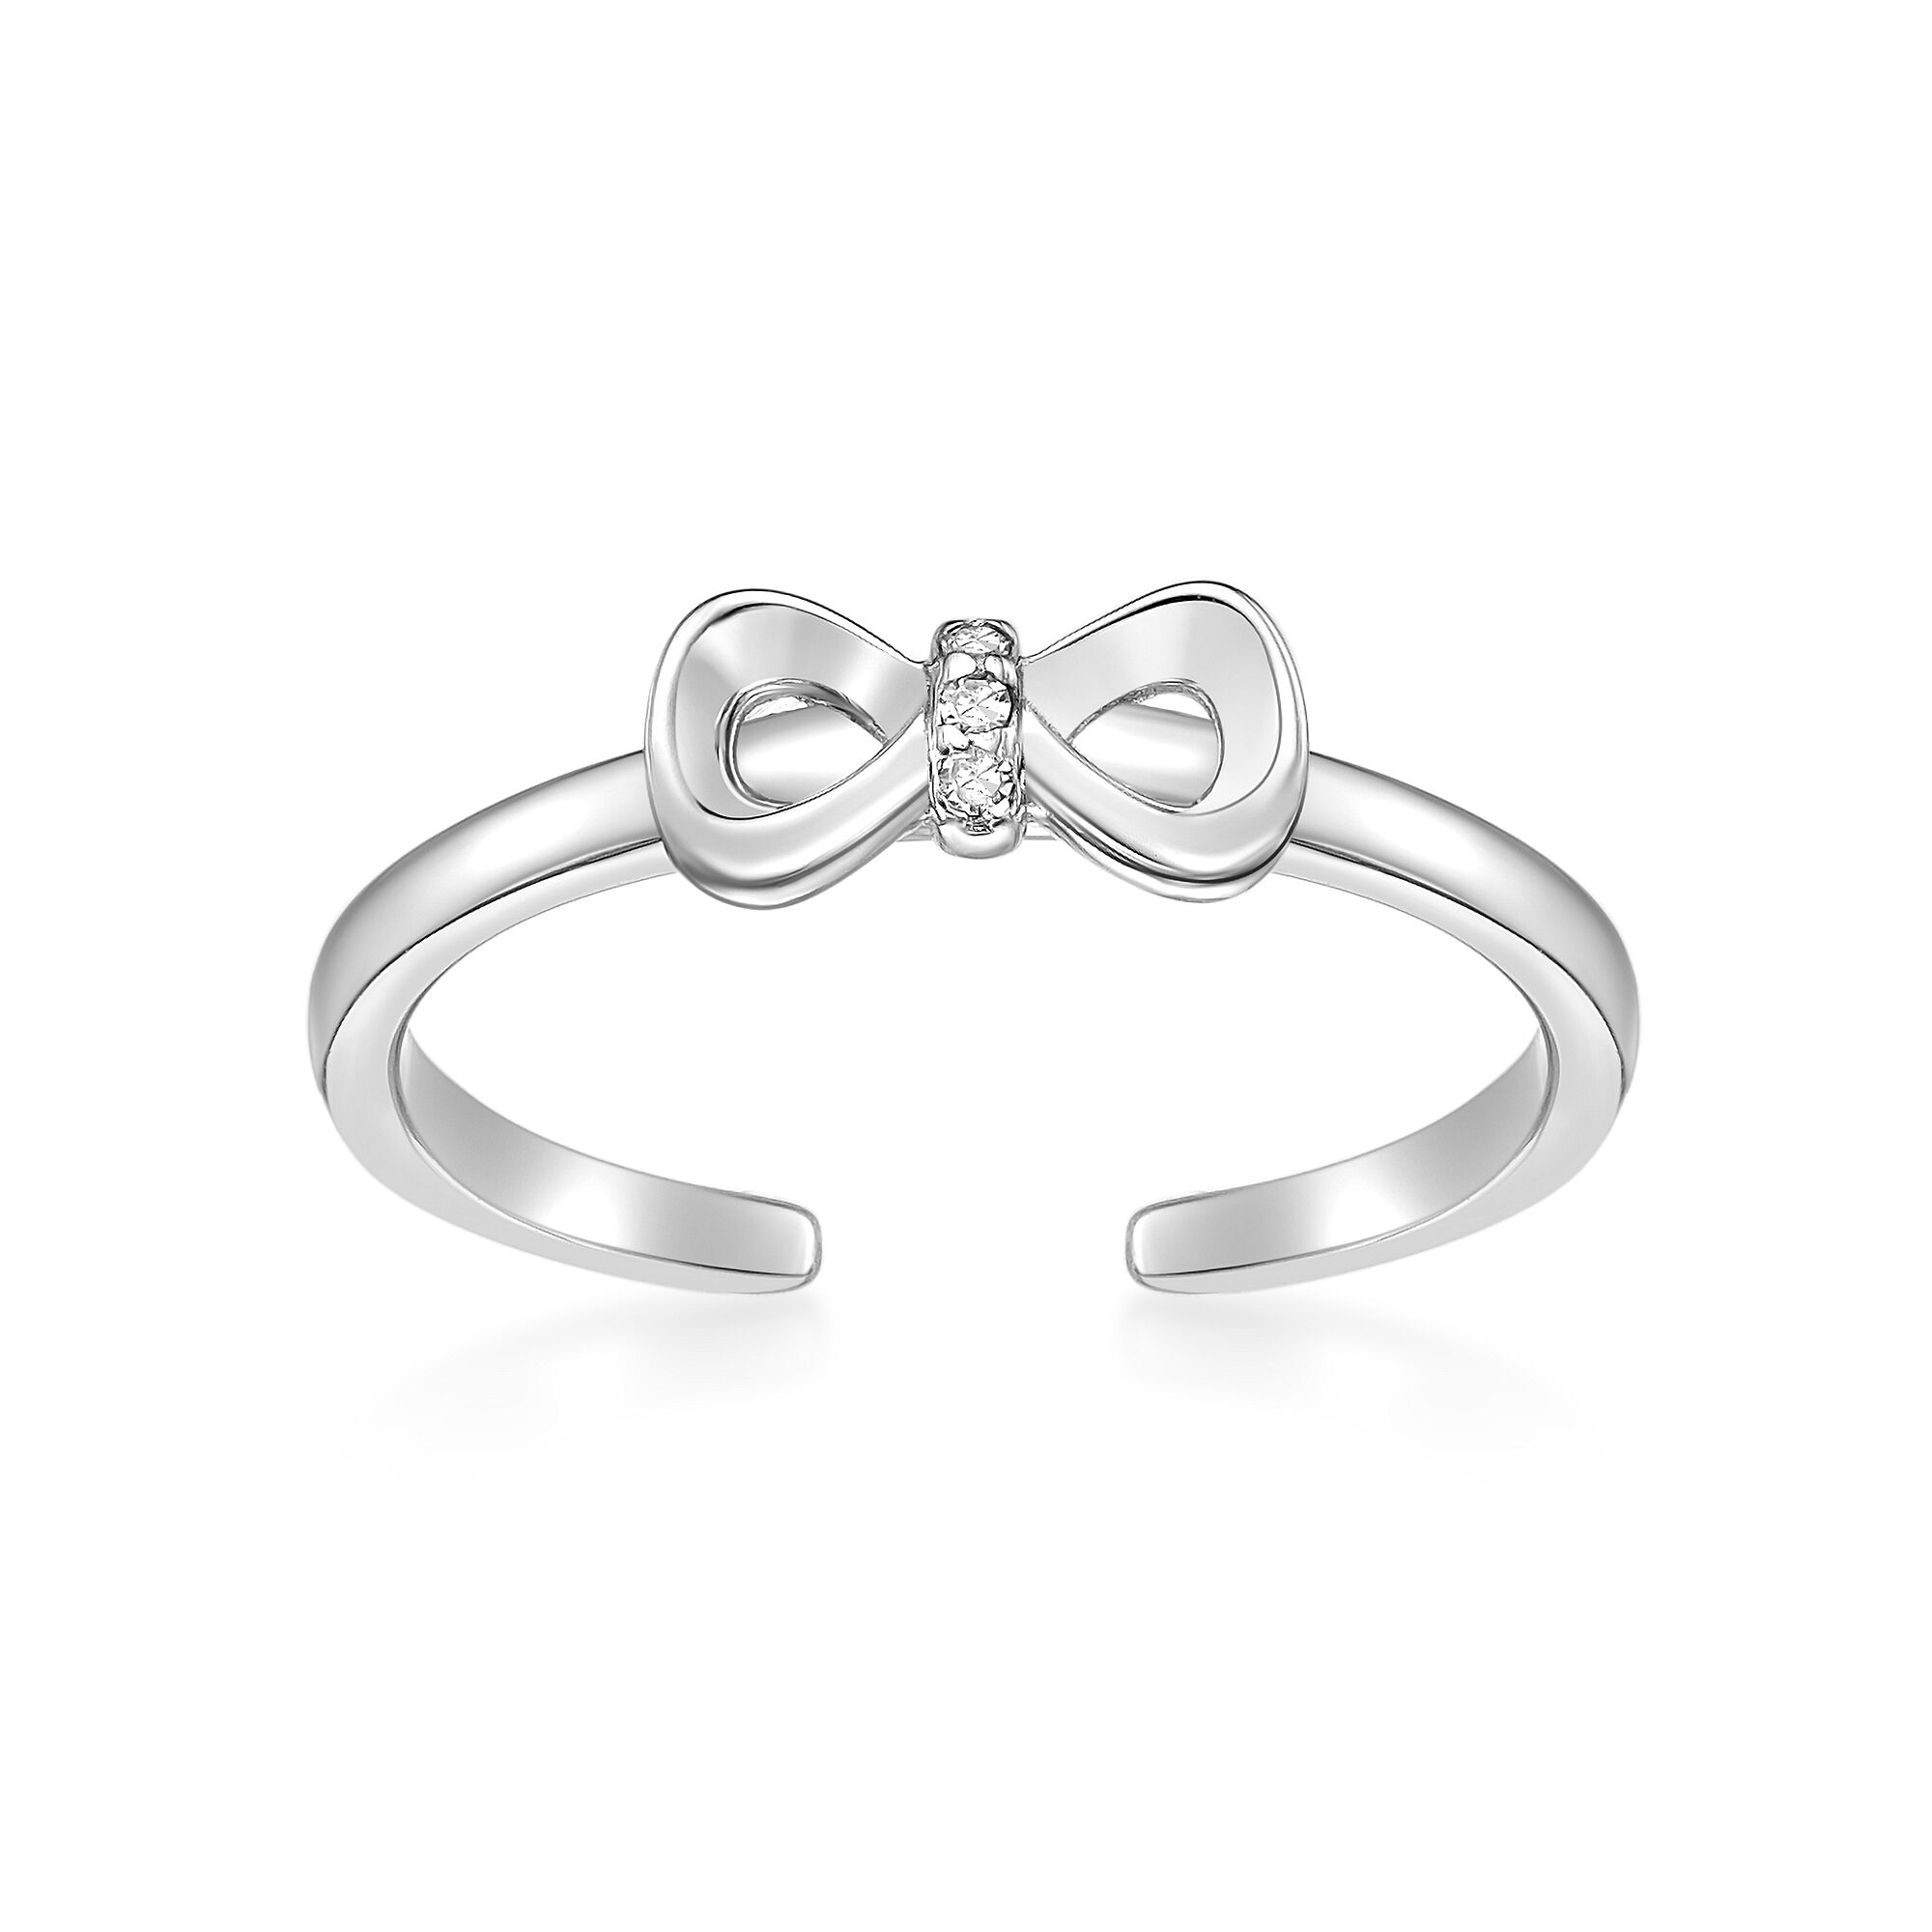 Lavari Jewelers Women's Bow Adjustable Toe Ring, 925 Sterling Silver, .015 Cttw